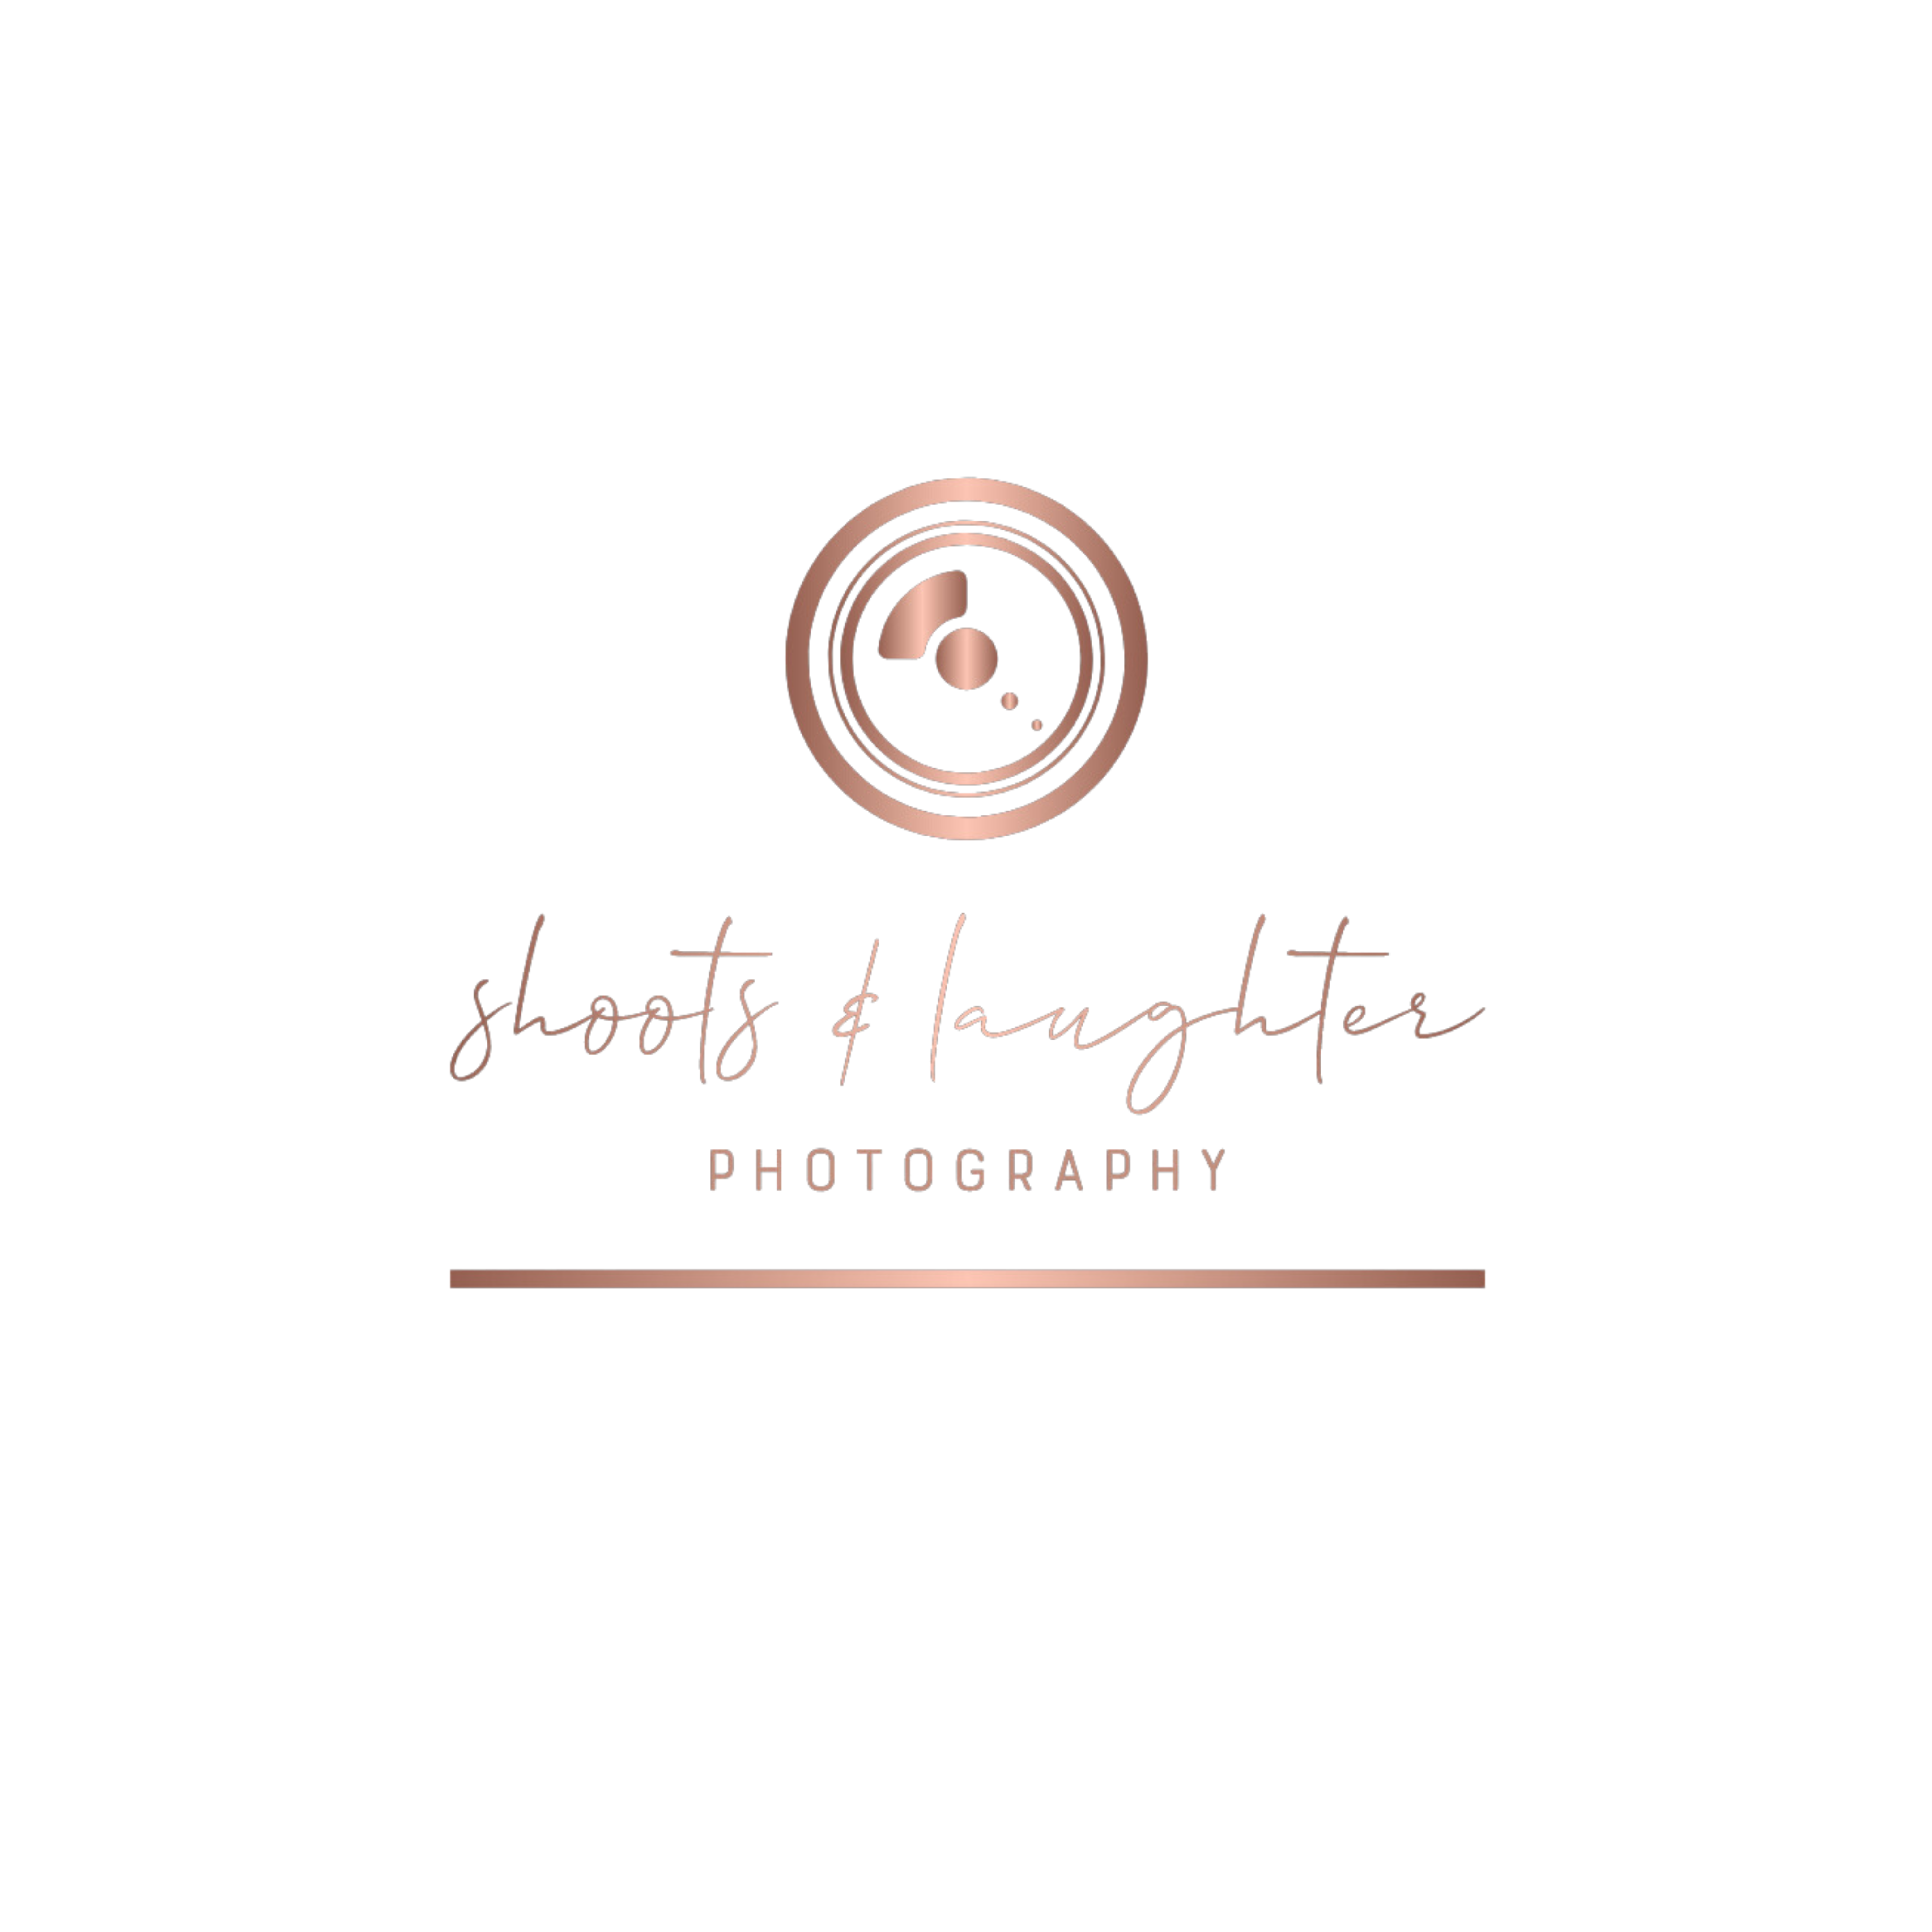 Shoots & Laughter Photography